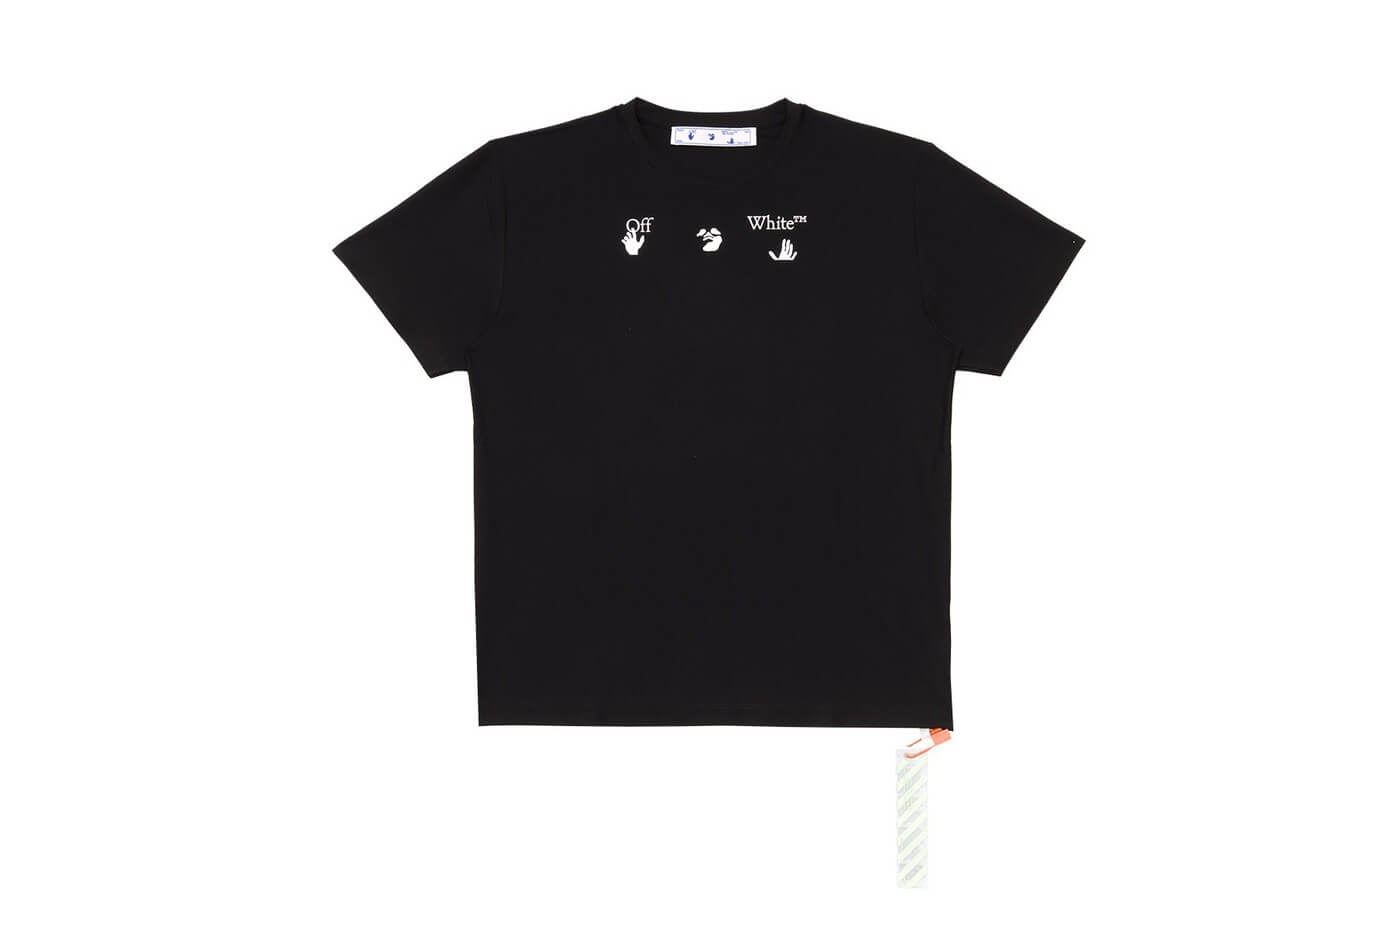 Off-White presents its new logo in a t-shirt - HIGHXTAR.